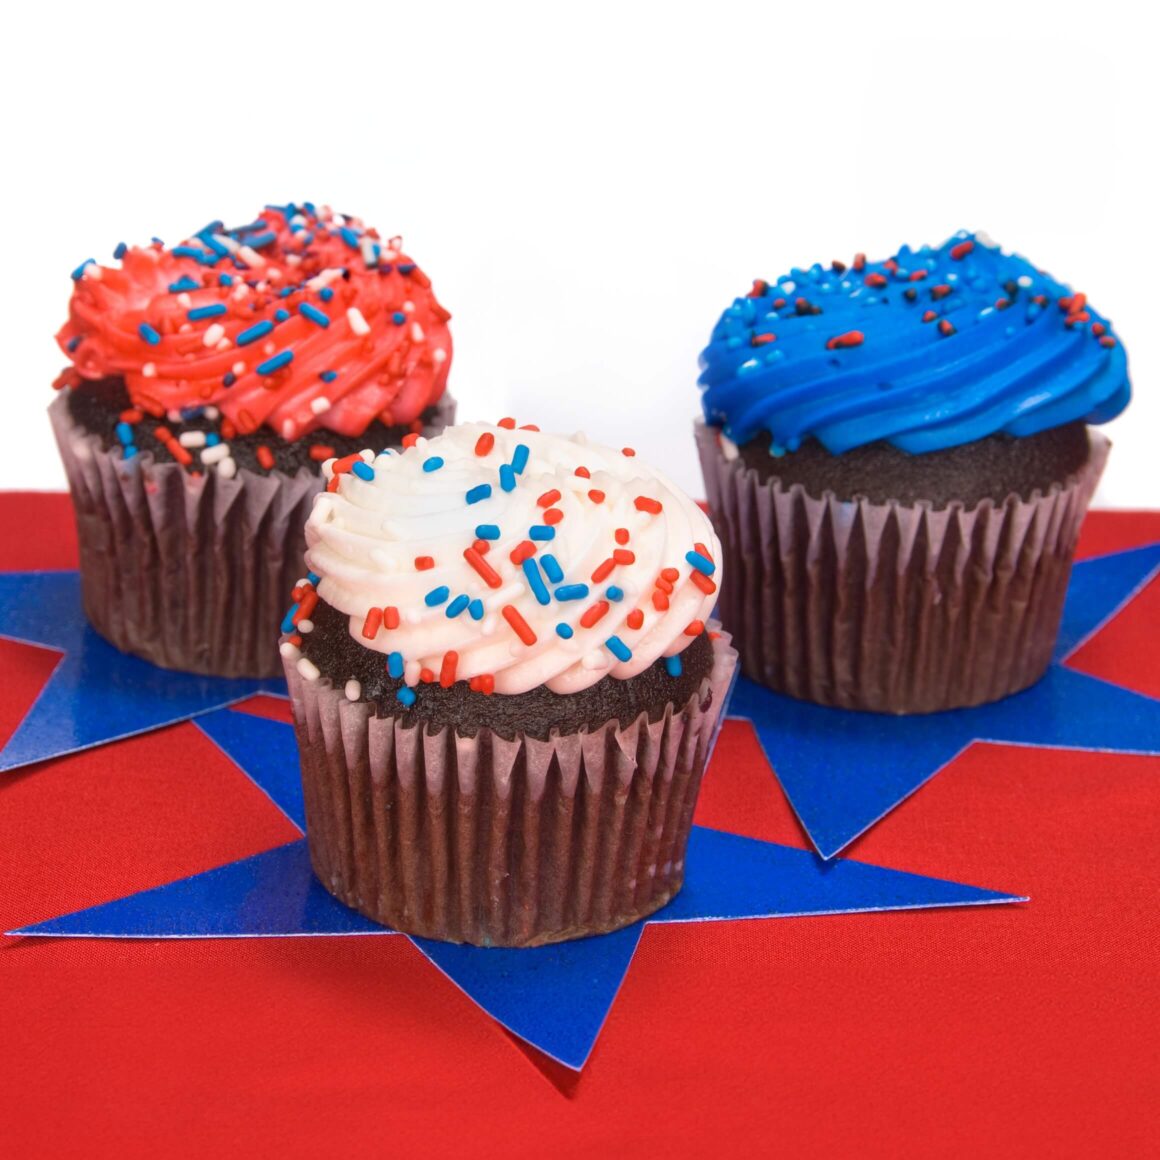 Make Red, White, and Blue Desserts on Memorial Day